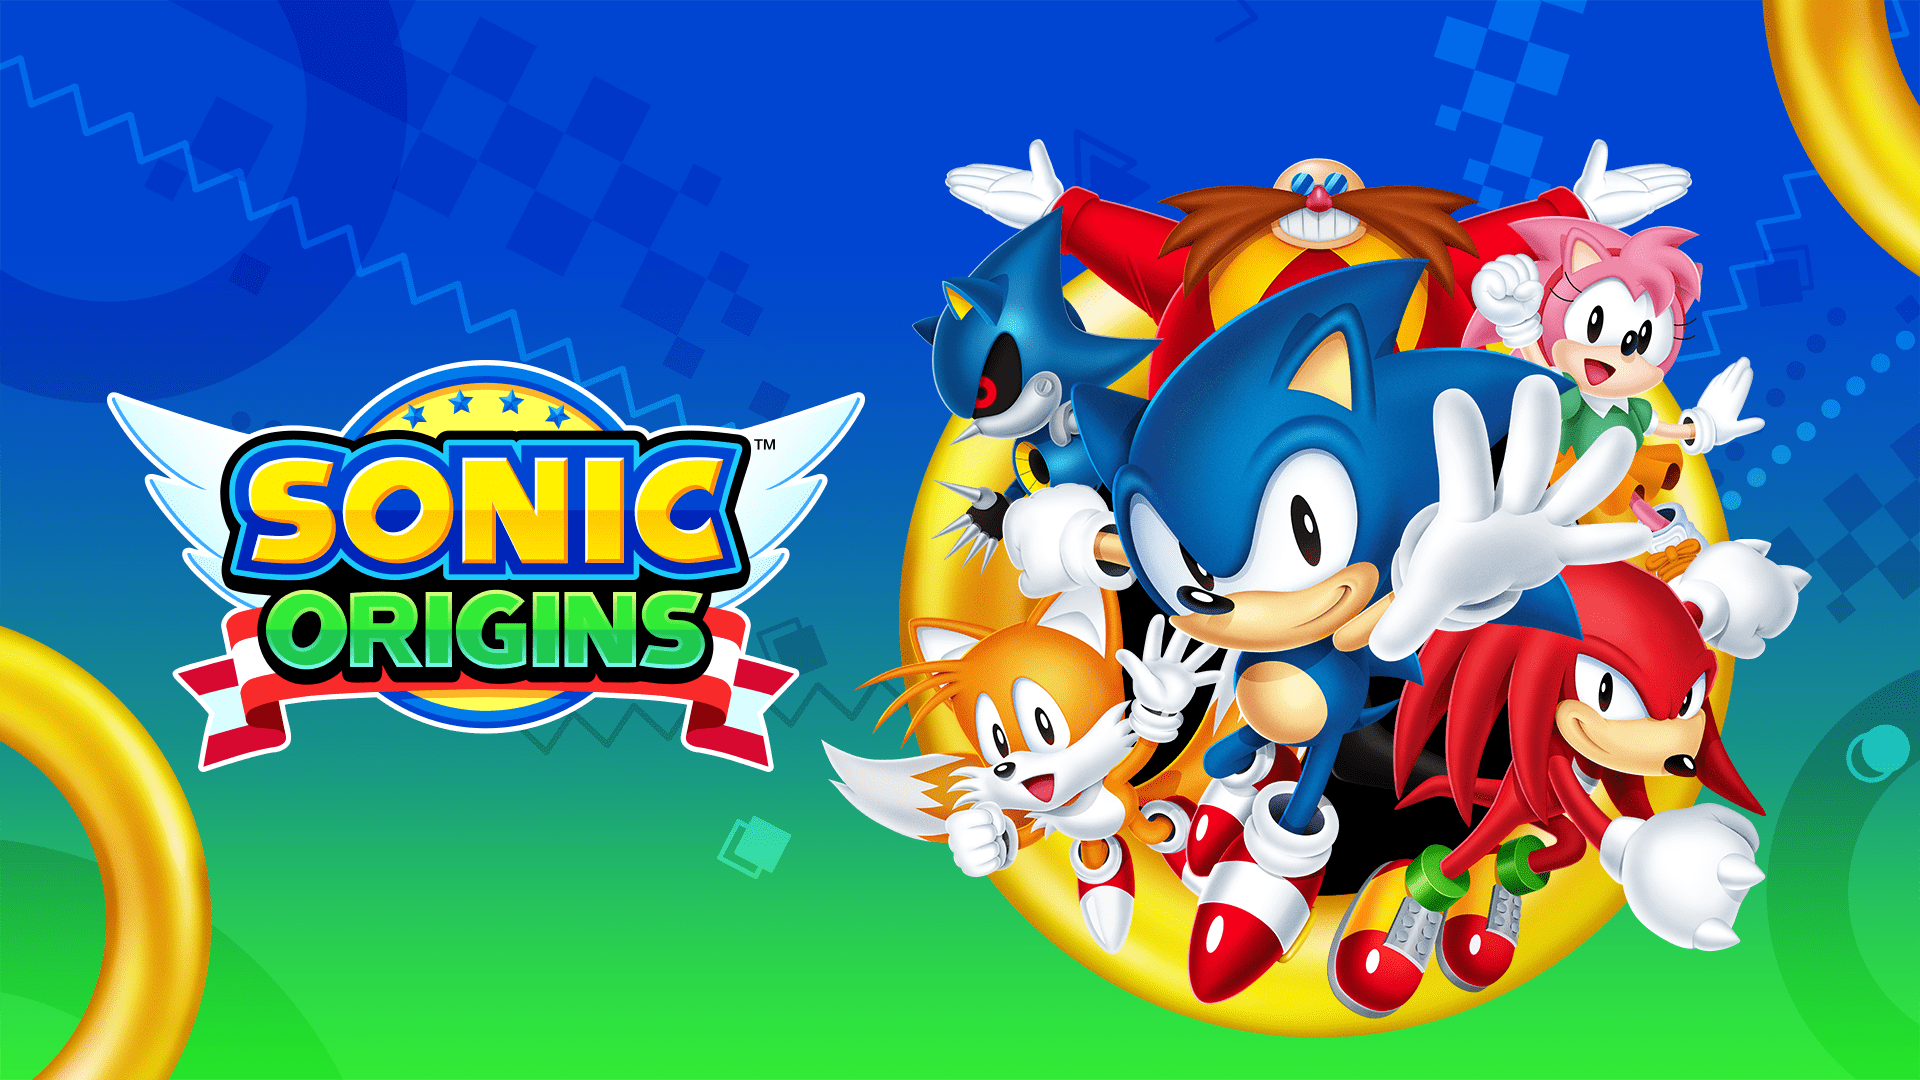 Sonic Origins PS4 (1080p) - Sonic 2 with Super Tails Playthrough